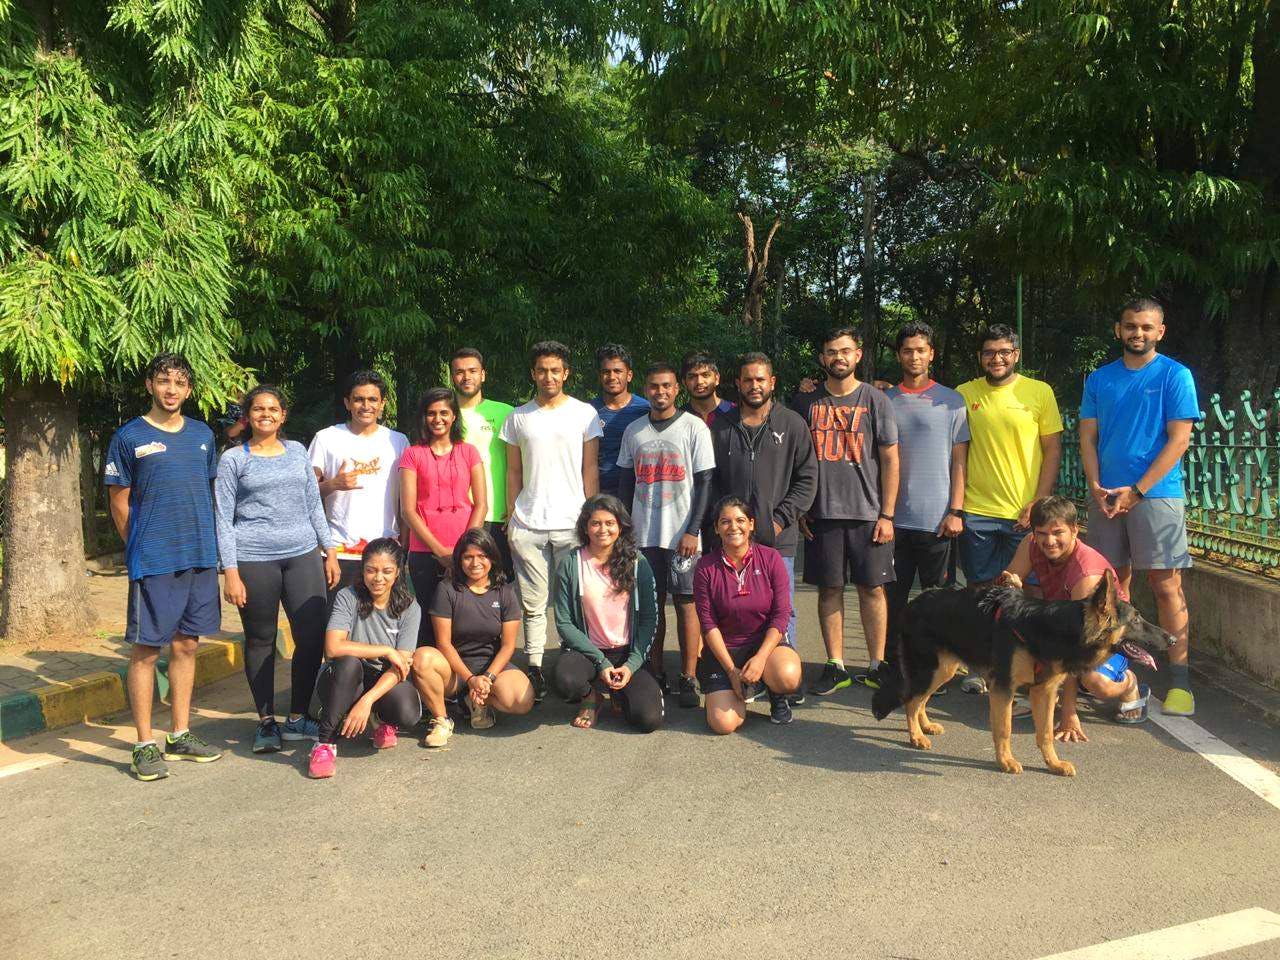 One Stride At A Time With #thepimpmystridecrew - the #runningsquad of Bengaluru